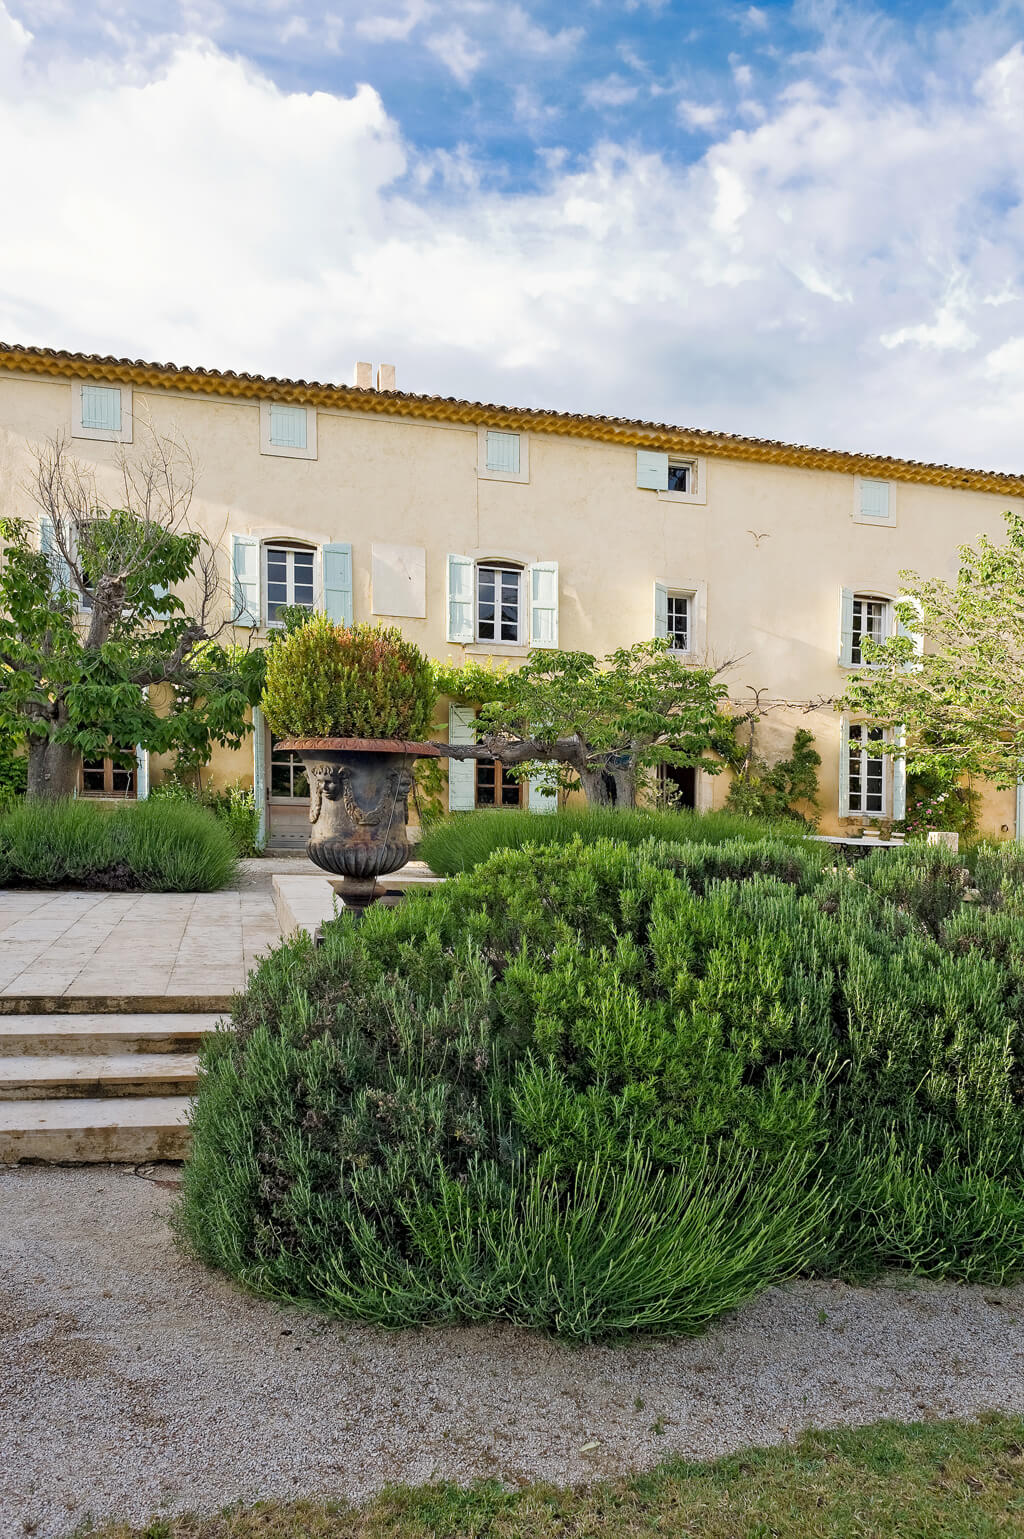 Provence retreat! Inspiring French country interiors, enchanting gardens, and rich architectural details in a historical and luxurious vacation rental from HAVEN IN. #provence #frenchchateau #frenchcountry #frenchfarmhouse #interiordesign #architecture #european #counrtryhouse #havenin #rusticelegance